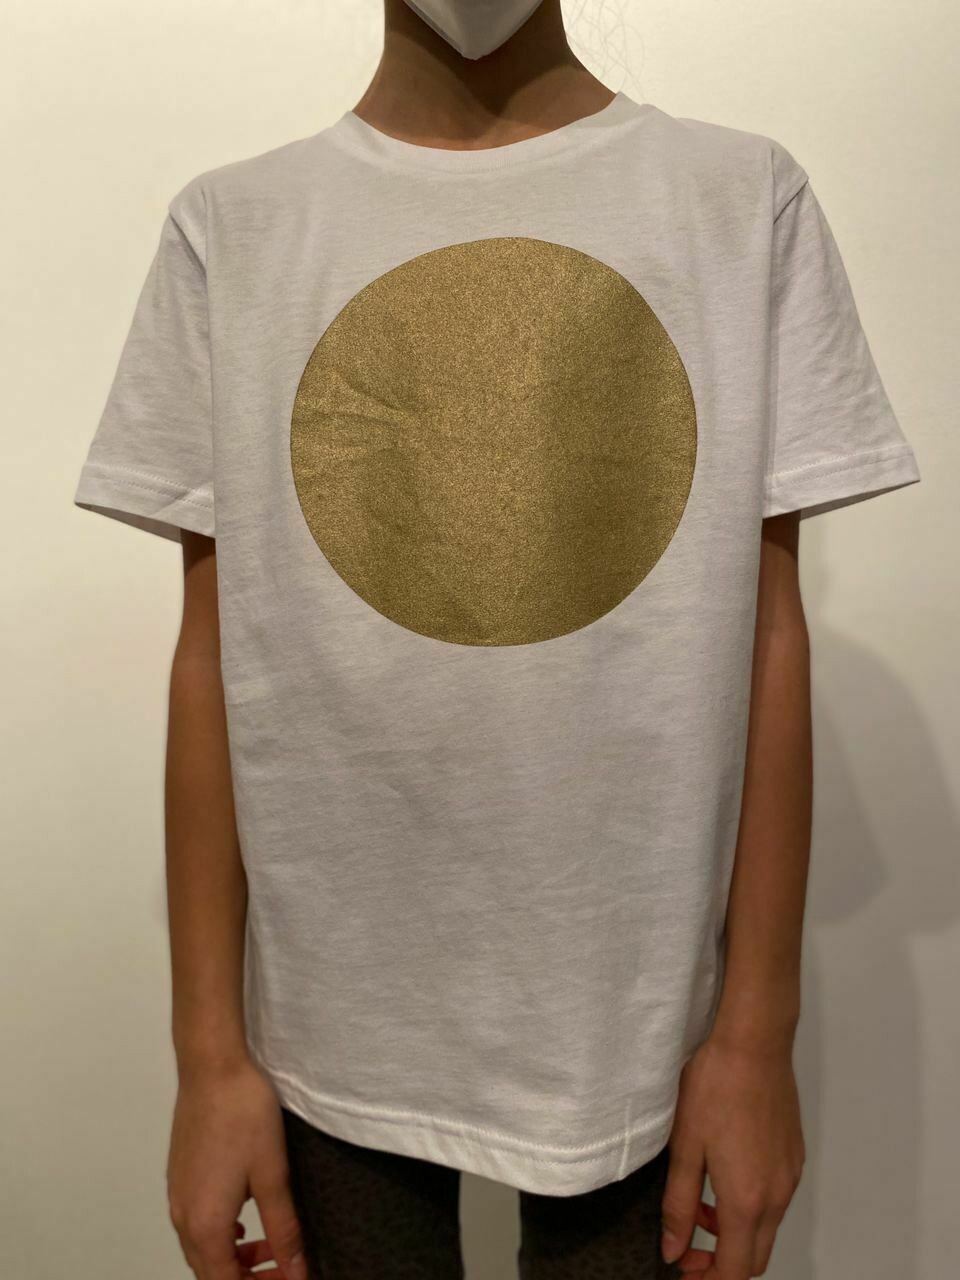 BE GOLDEN by The Lovers, Kinder T-shirt weiß / Druck gold